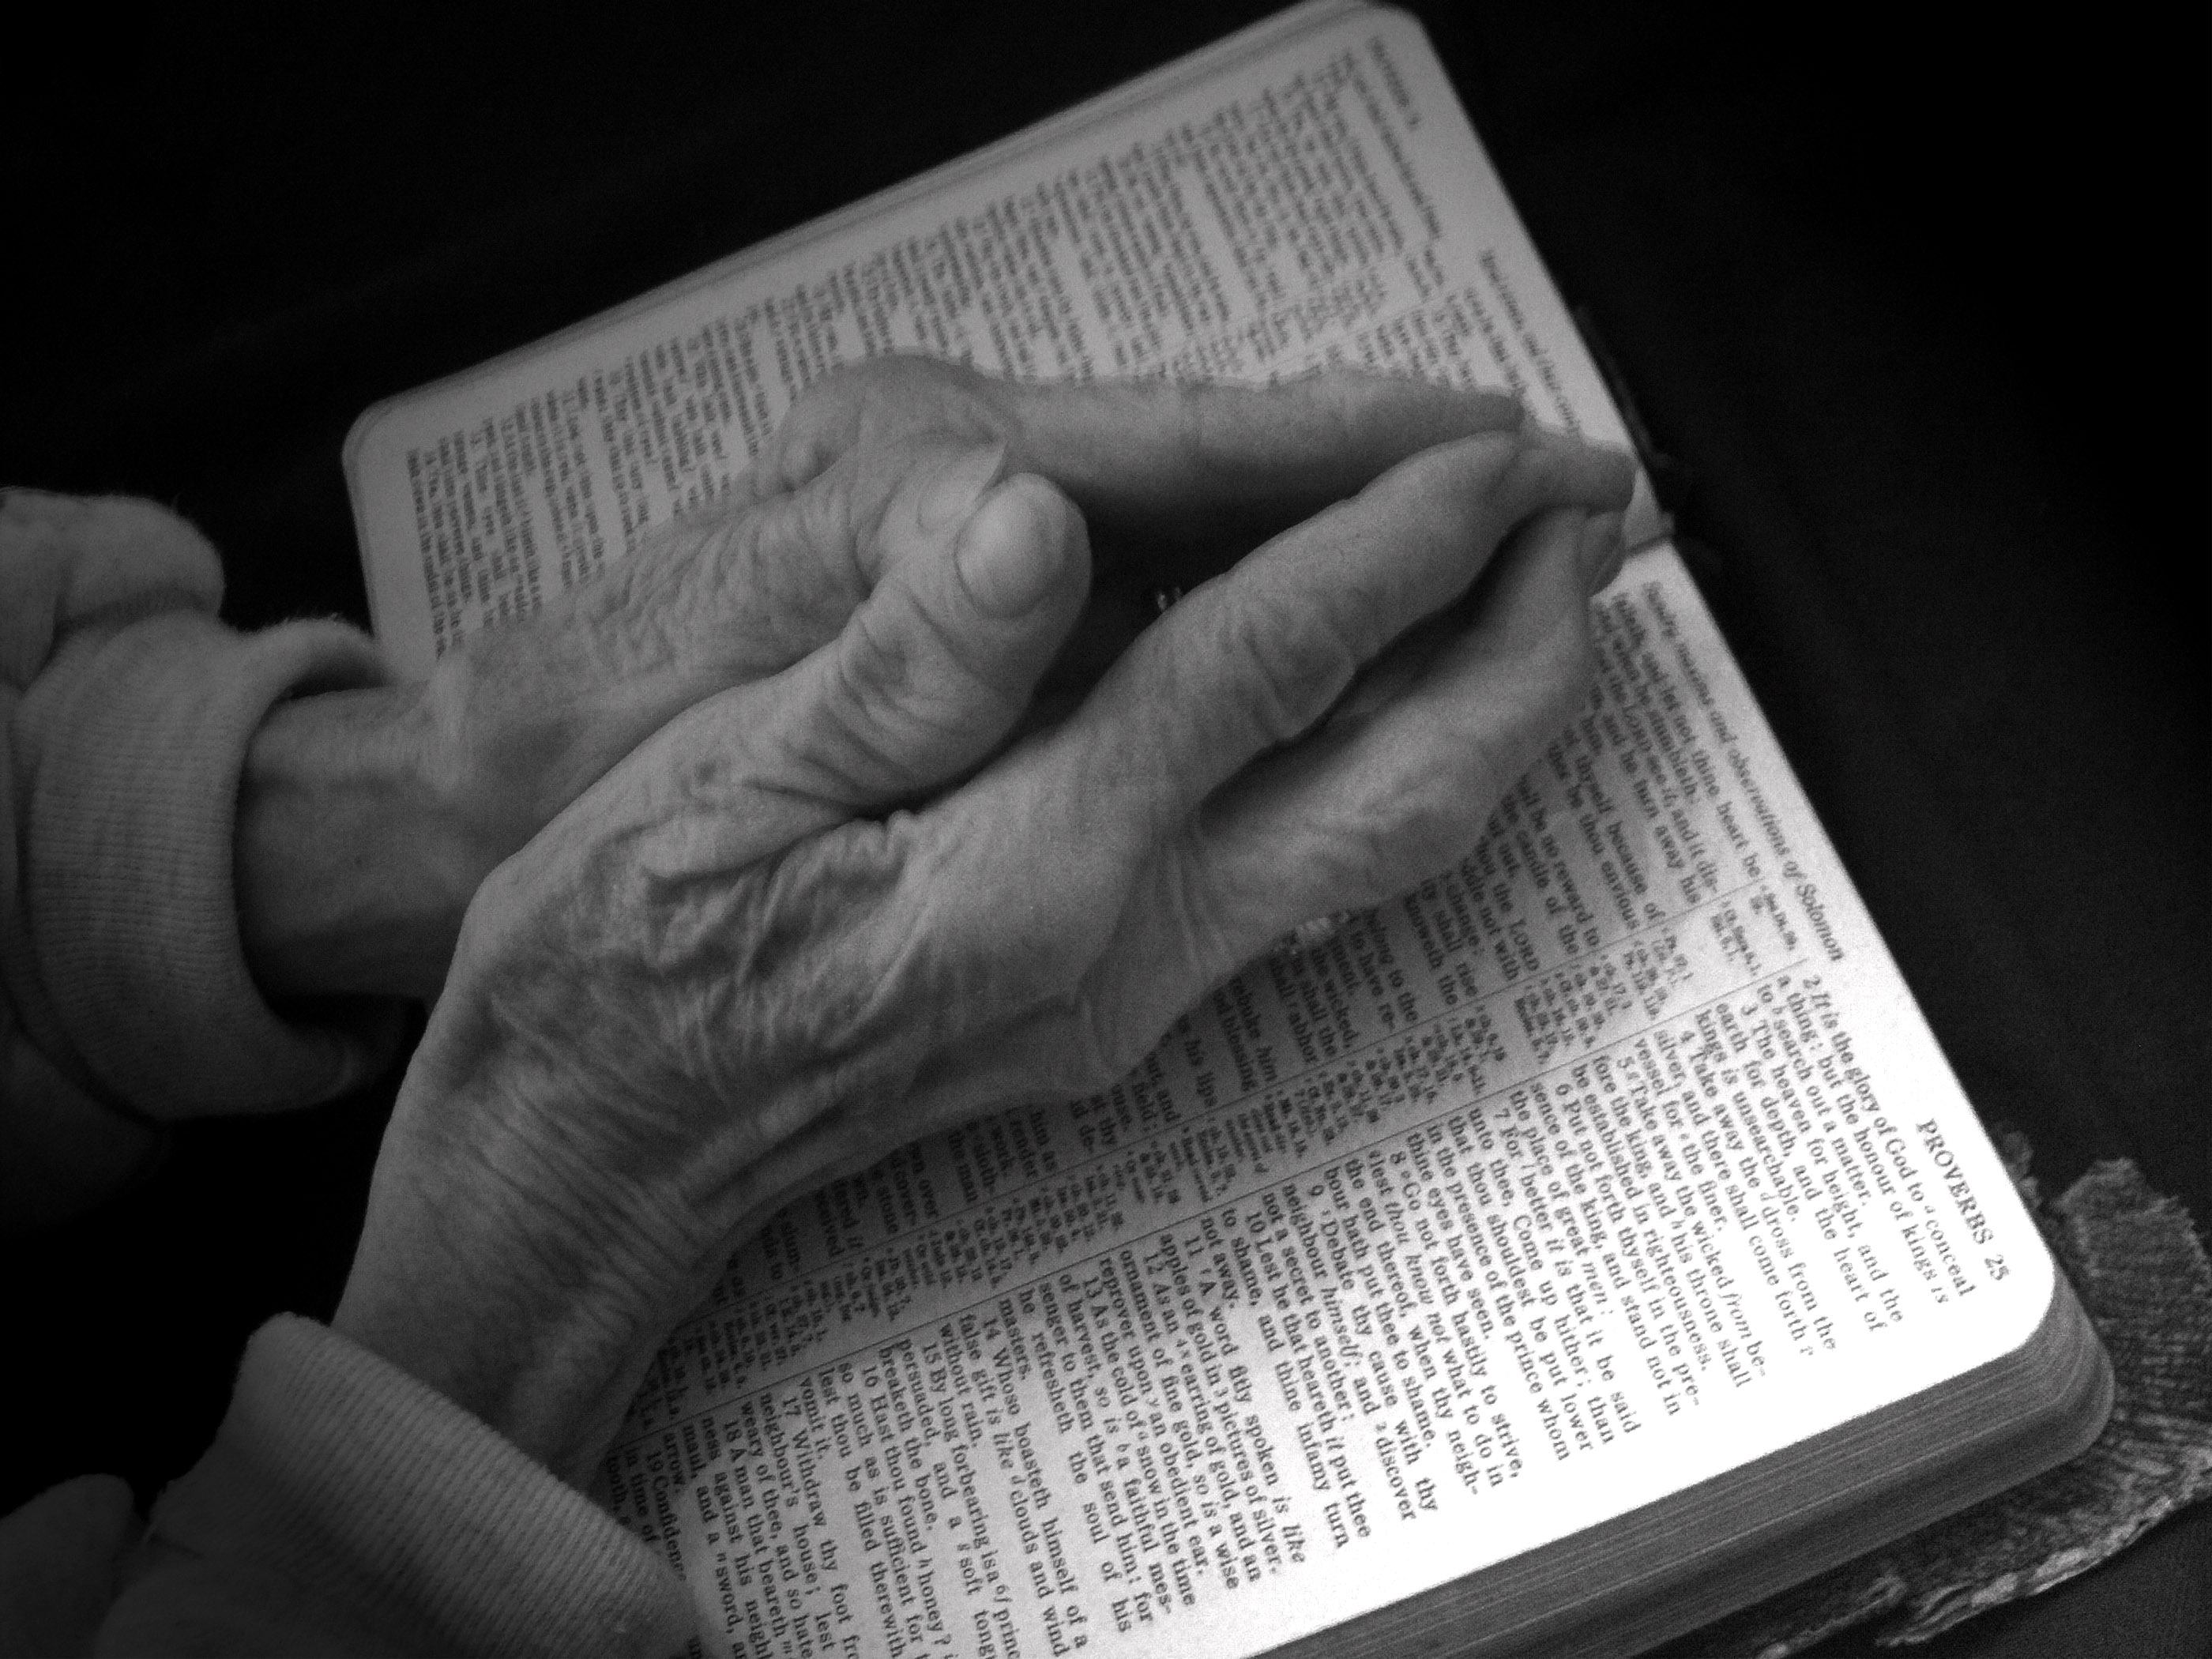 Praying hands on bible - black and white photo